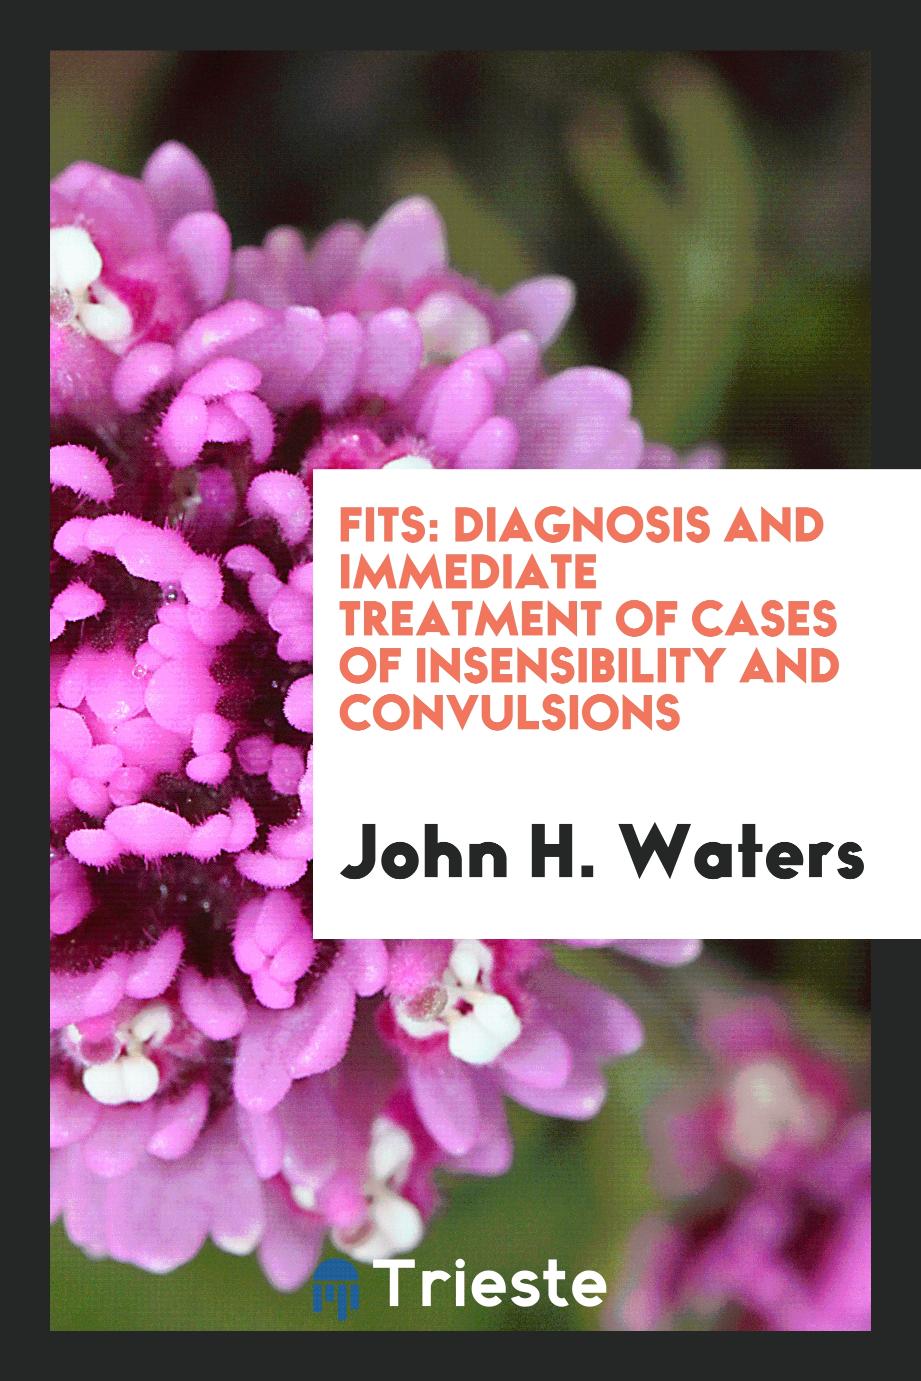 Fits: Diagnosis and Immediate Treatment of Cases of Insensibility and Convulsions